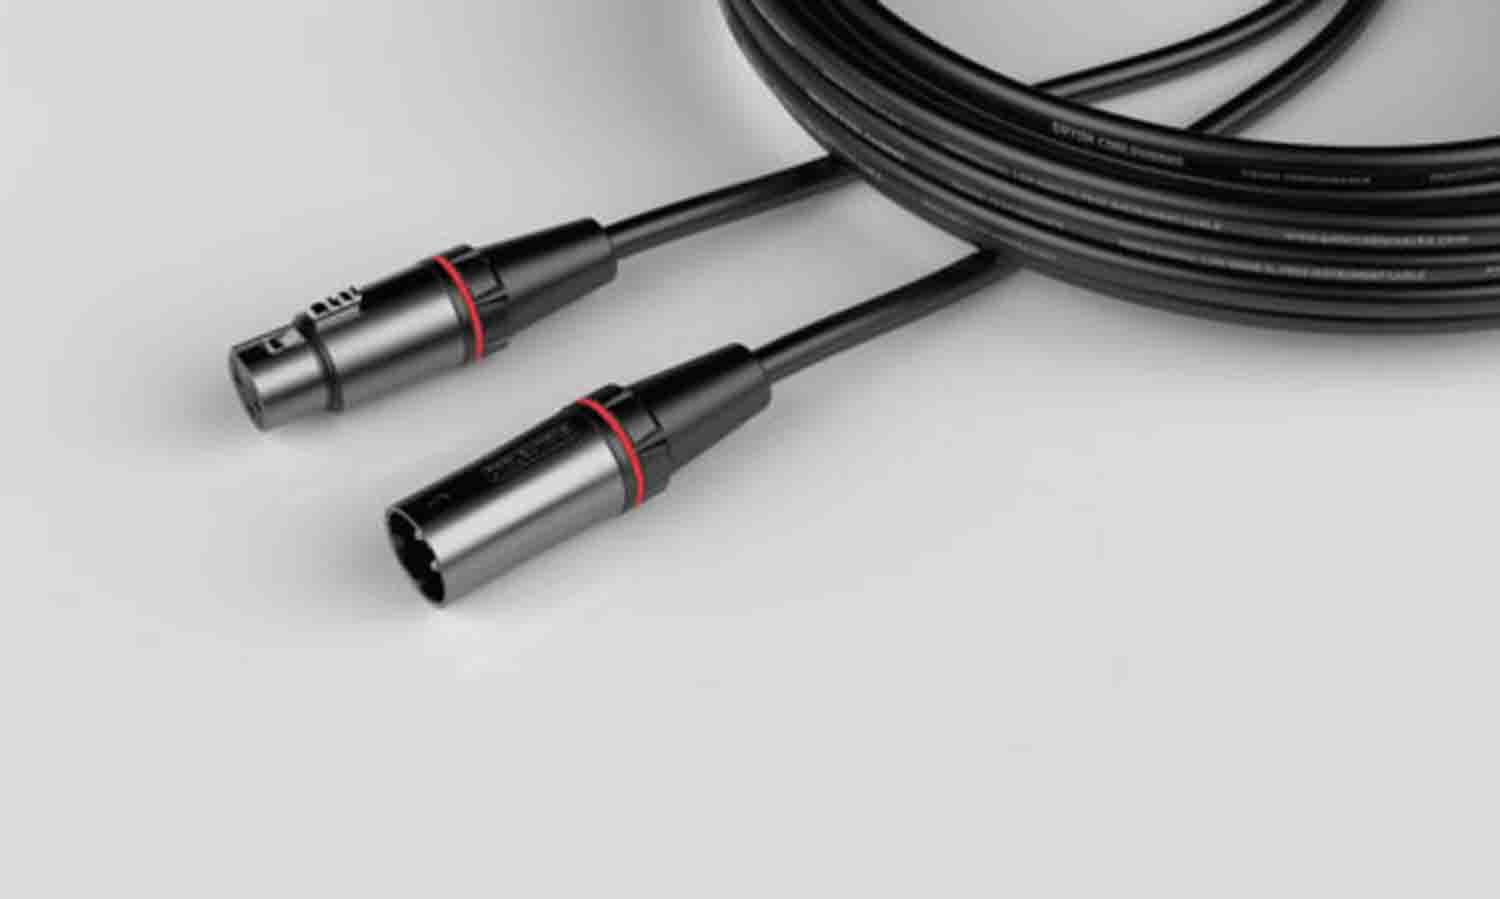 B-Stock: Gator Cableworks GCWH-XLR-20 Headliner Series XLR Microphone Cable - 20 Ft Gator Cases